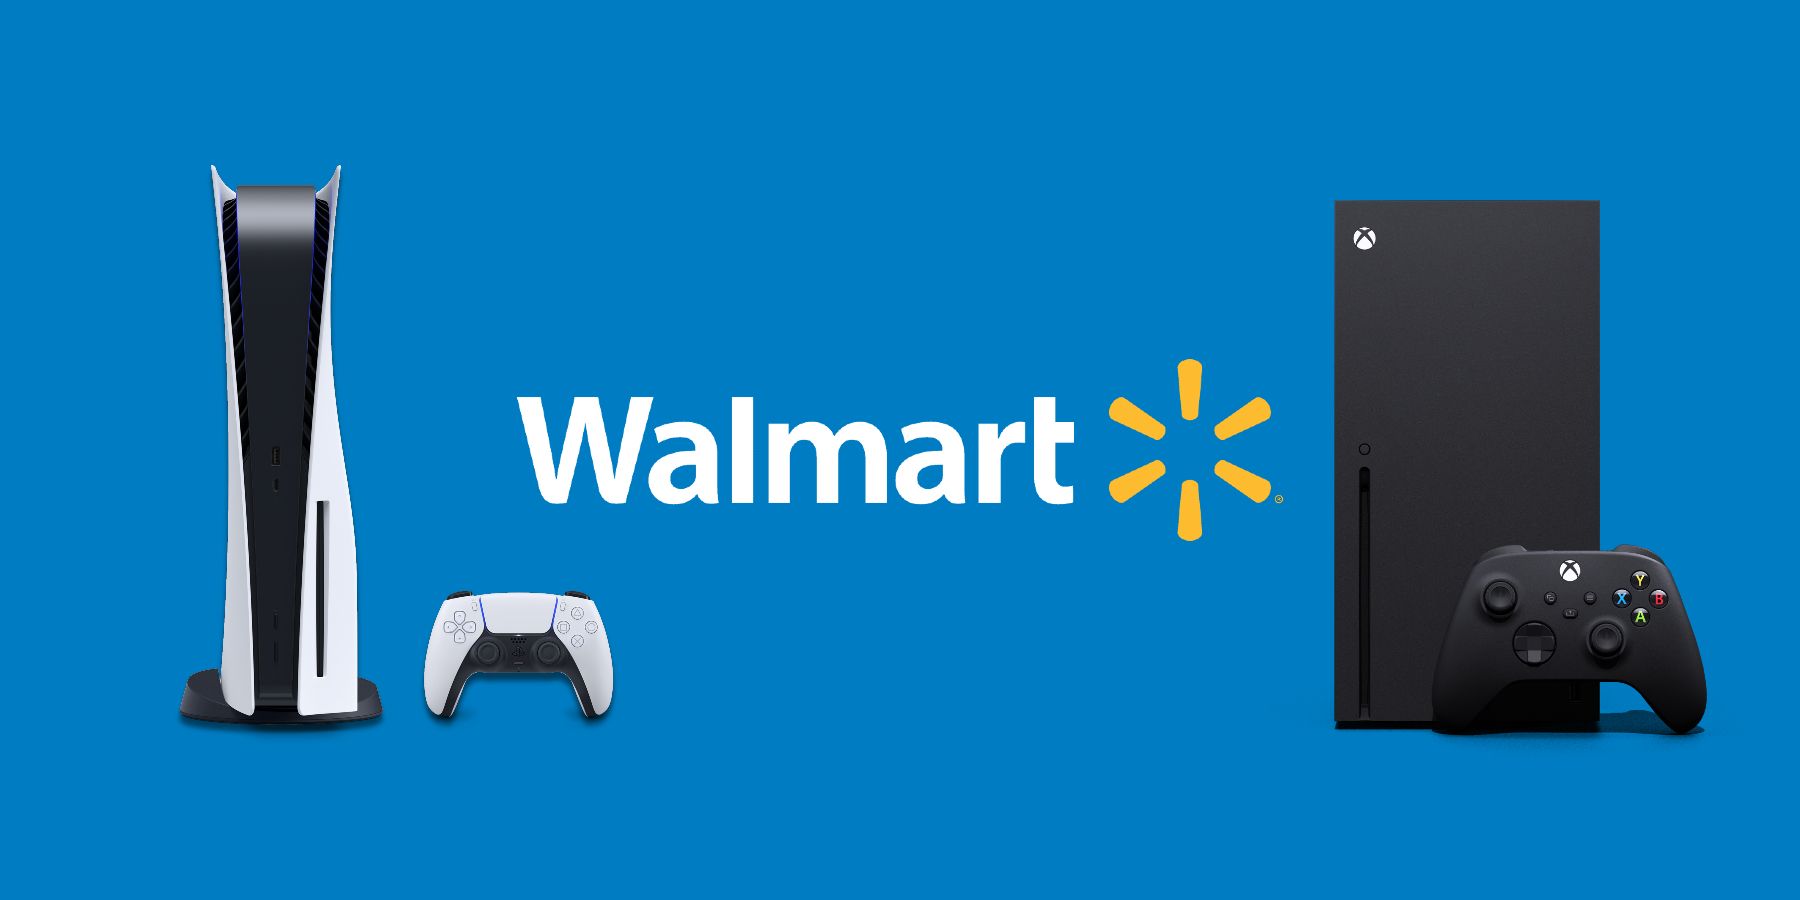 The PlayStation 5 is finally back in stock at Walmart for Black Friday